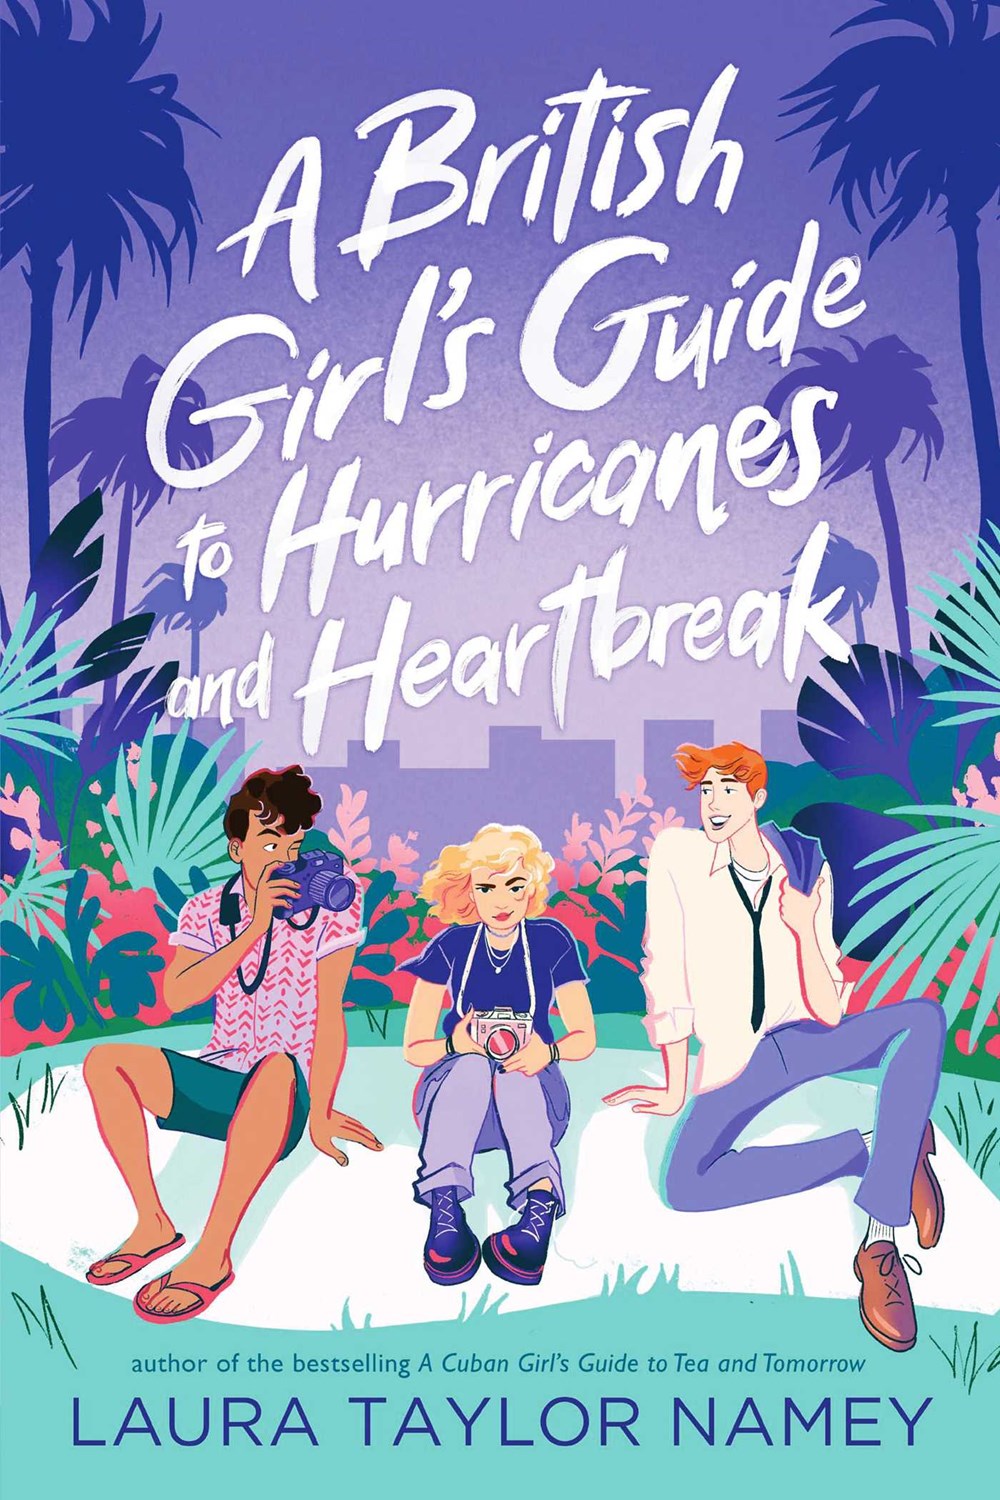 A British Girl's Guide to Hurricanes and Heartbreak (Girl's Guide #2) (Hardcover)